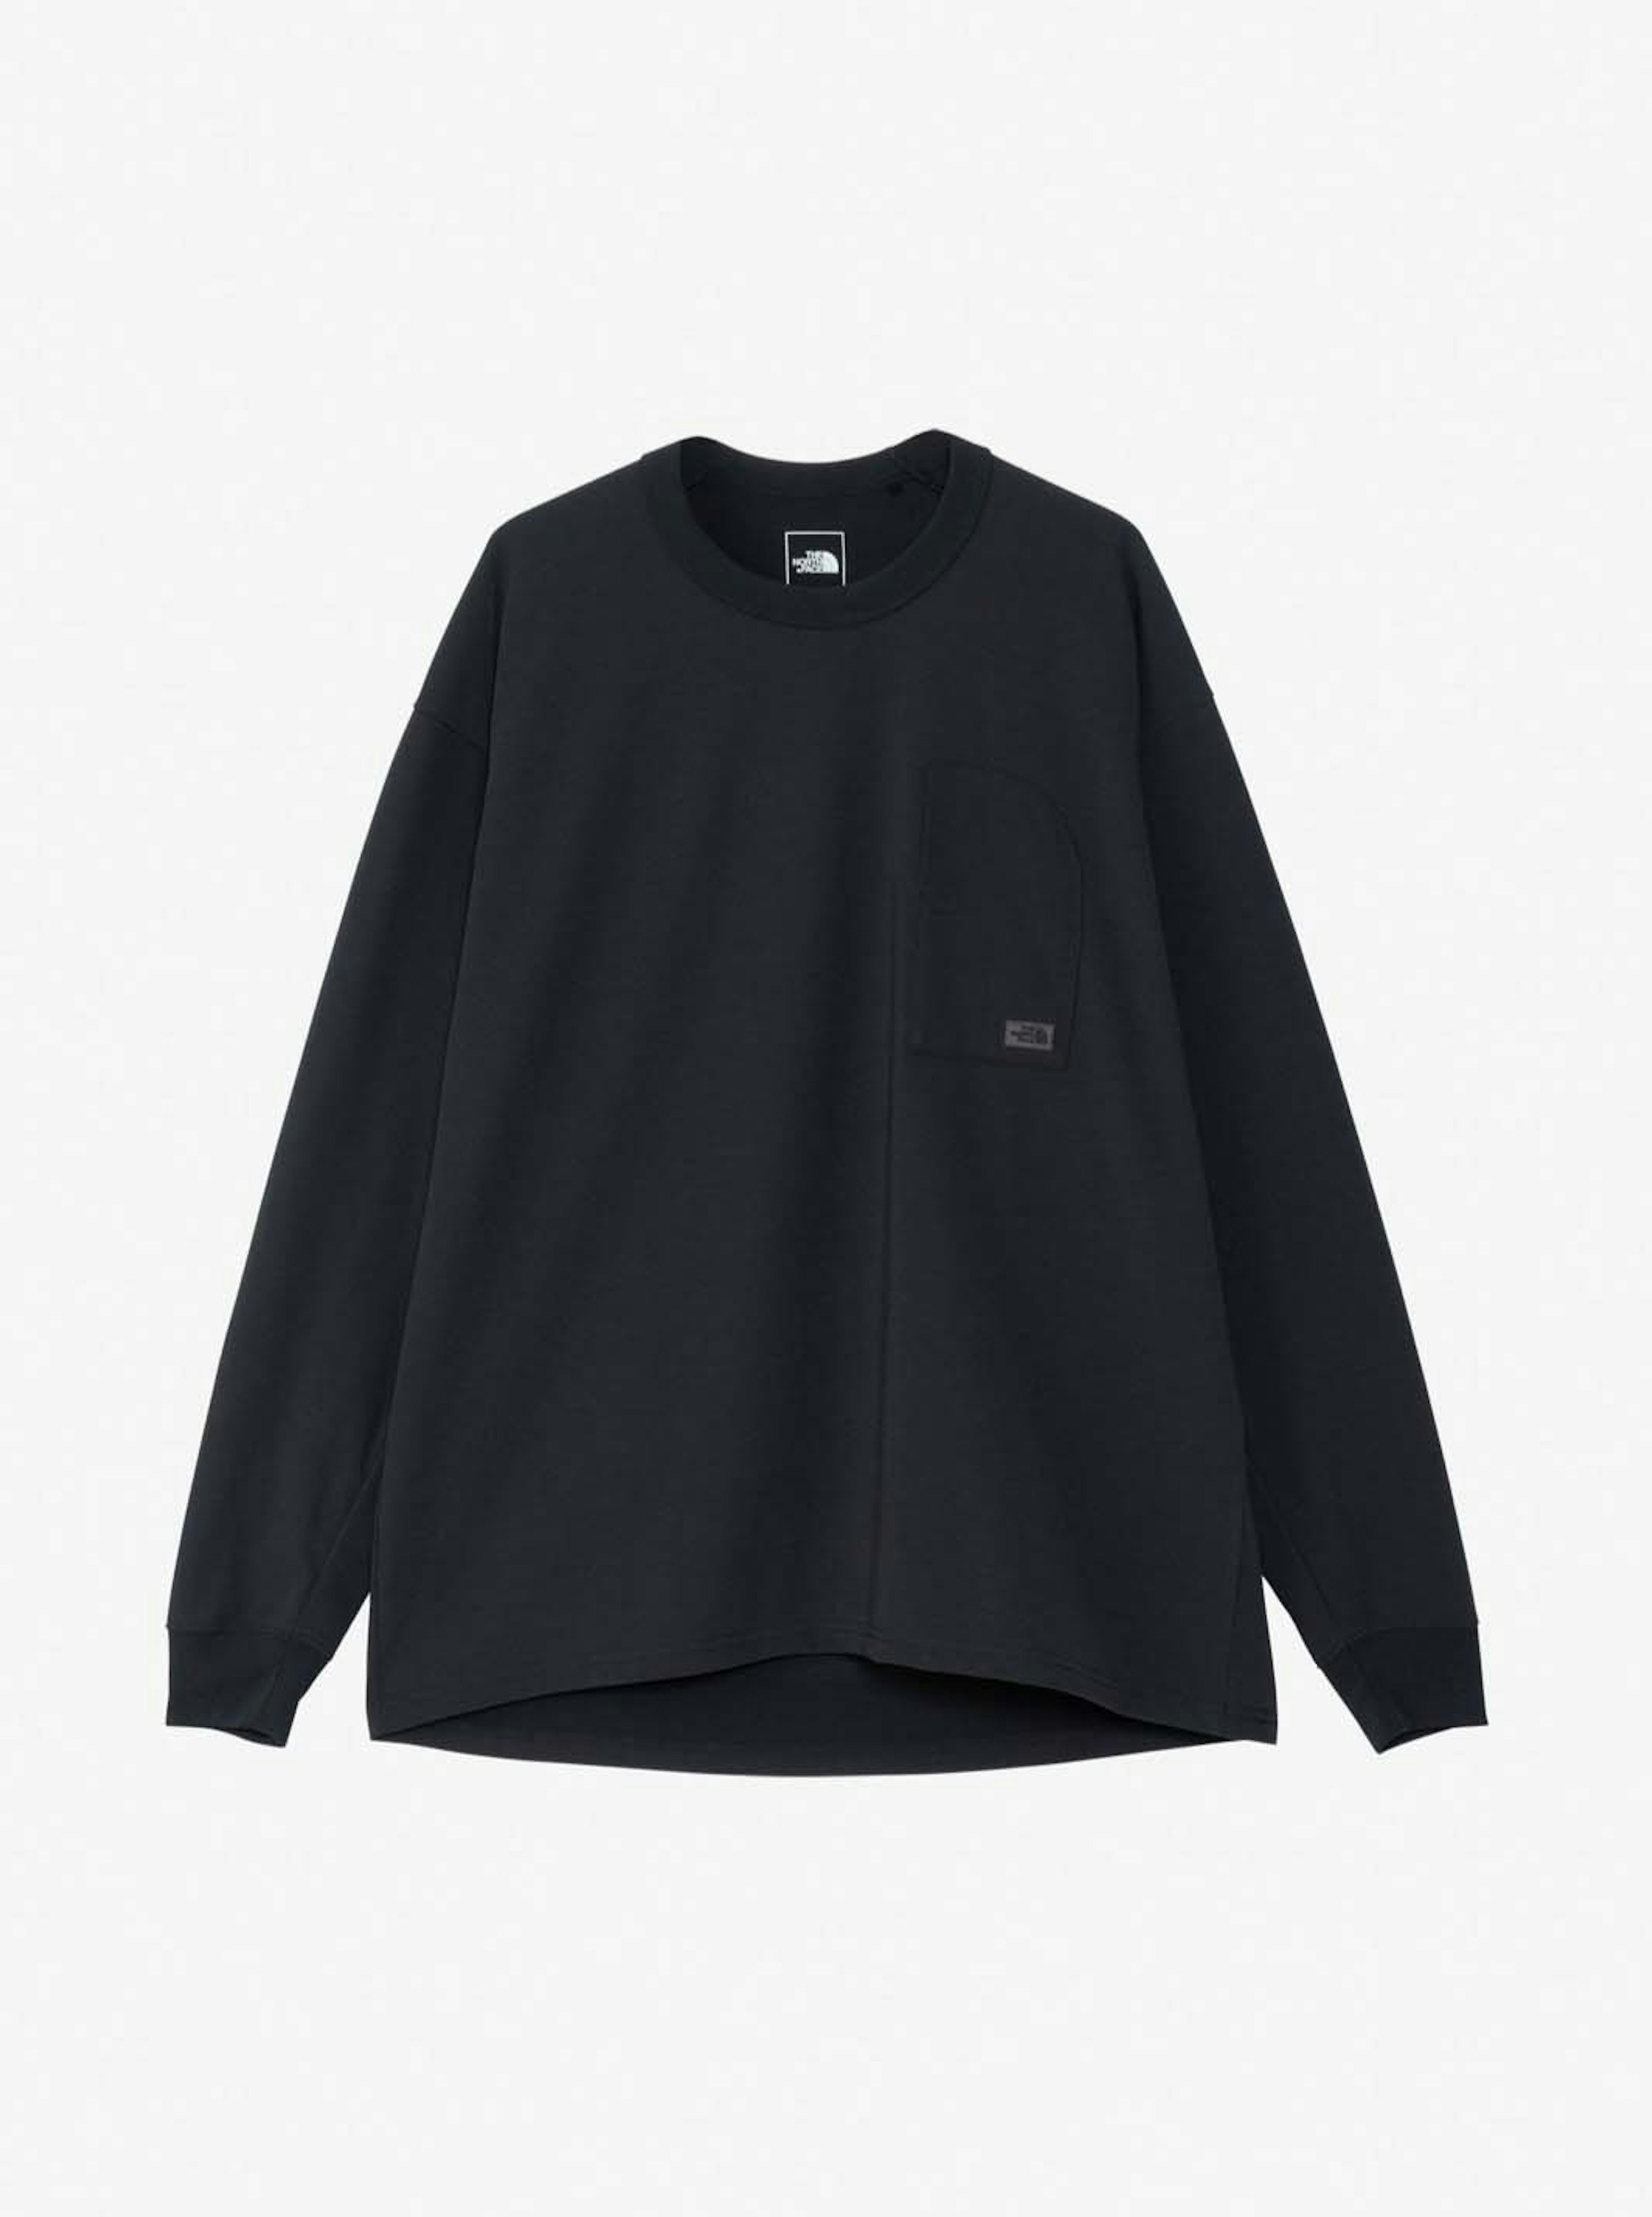 L/S Enride Tee, 12,100 yen (tax included)